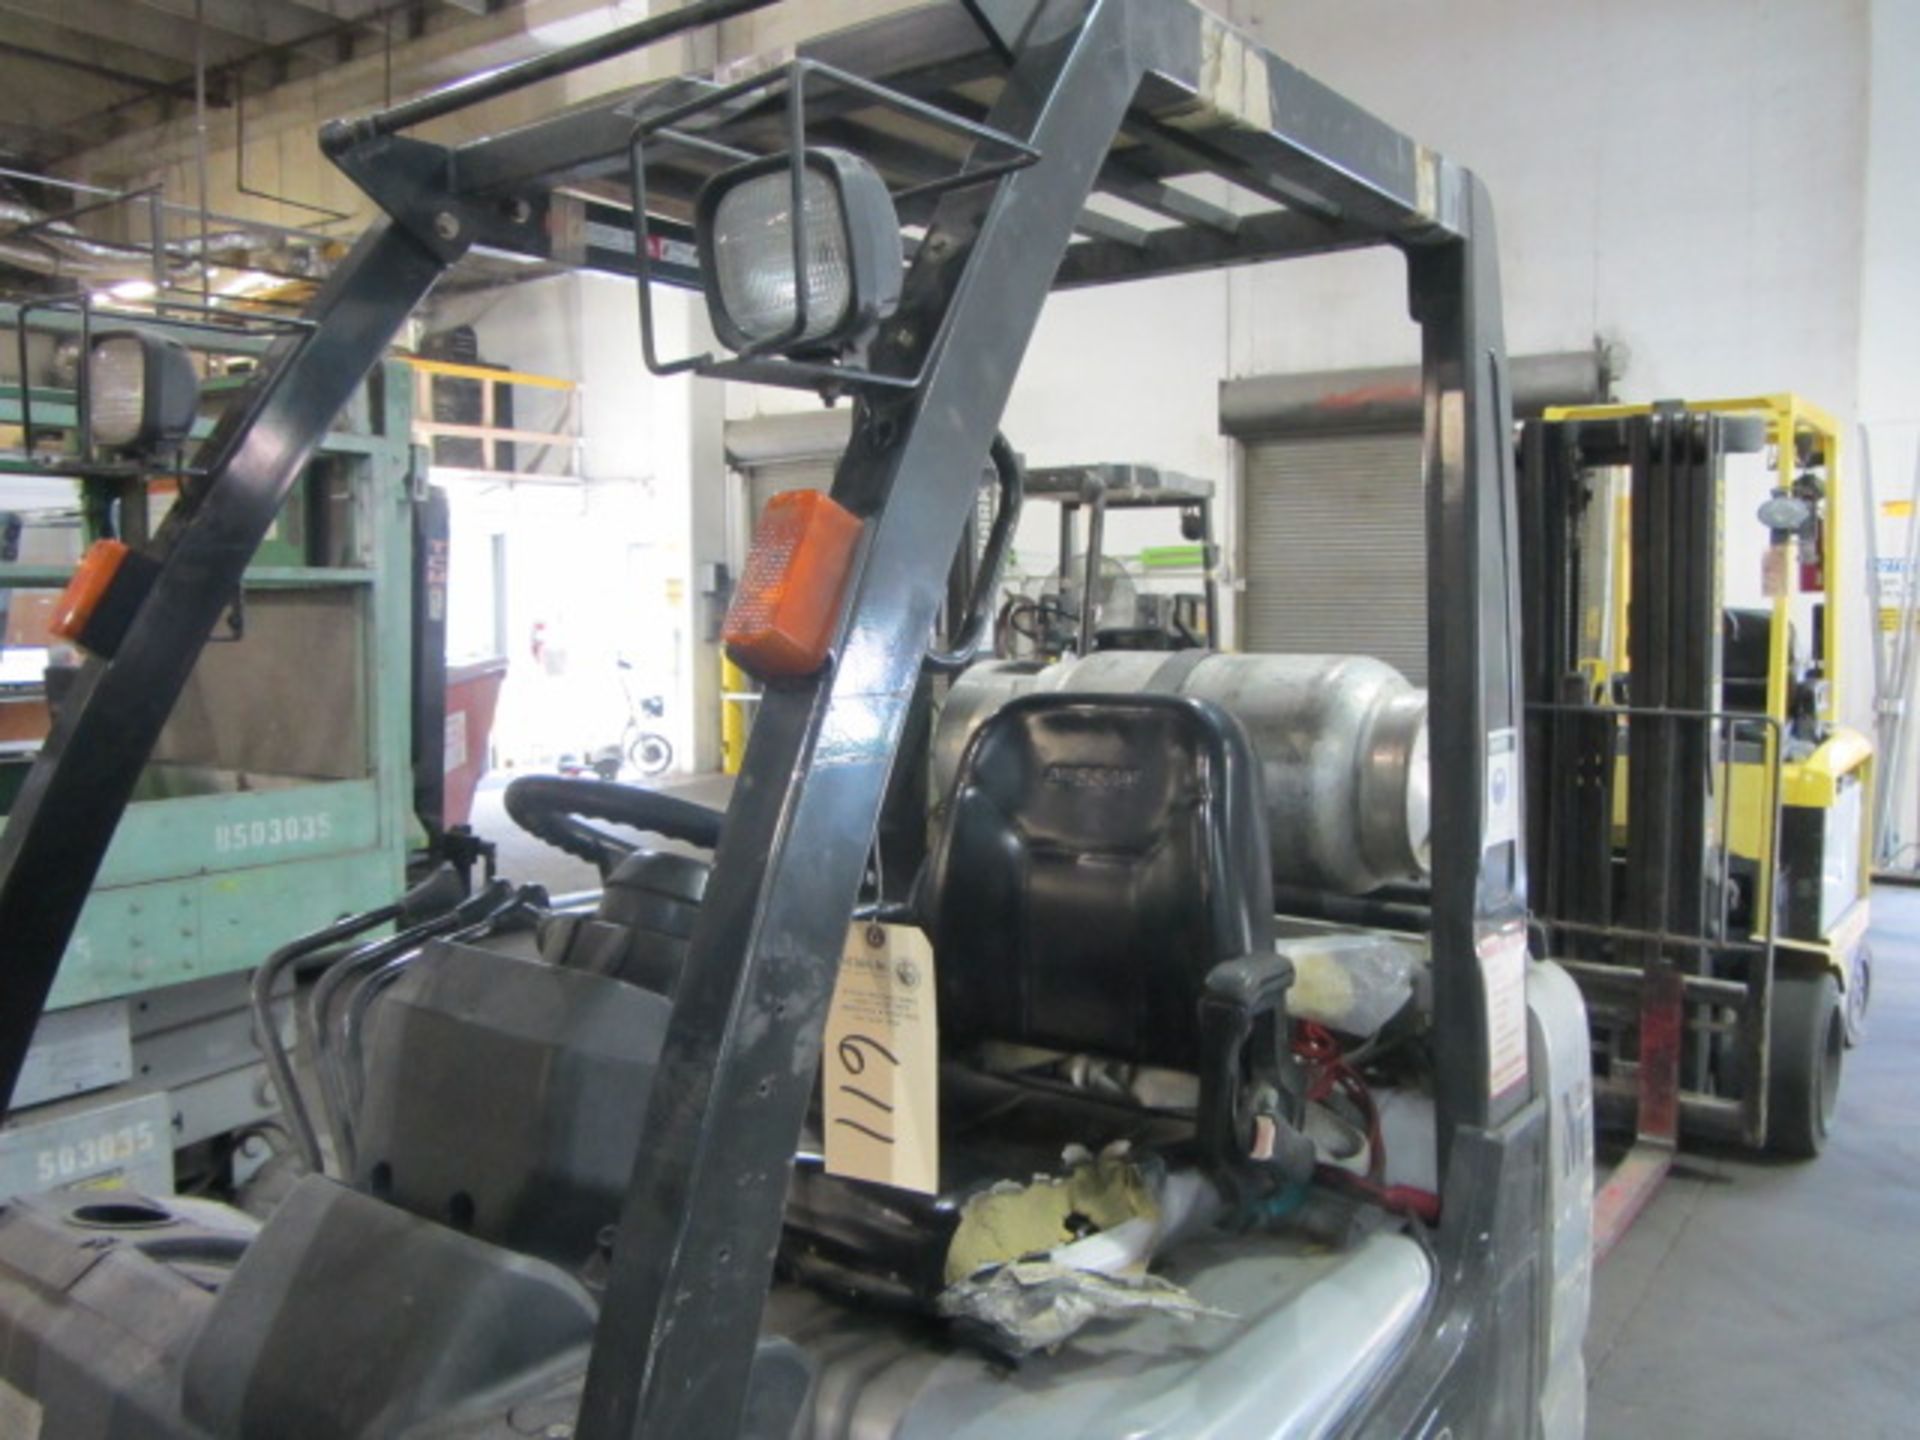 Nissan 50 4400lb Propane Forklift with 3-Stage Mast, Sideshift, sn:CPL02-9P2424 - Image 2 of 7